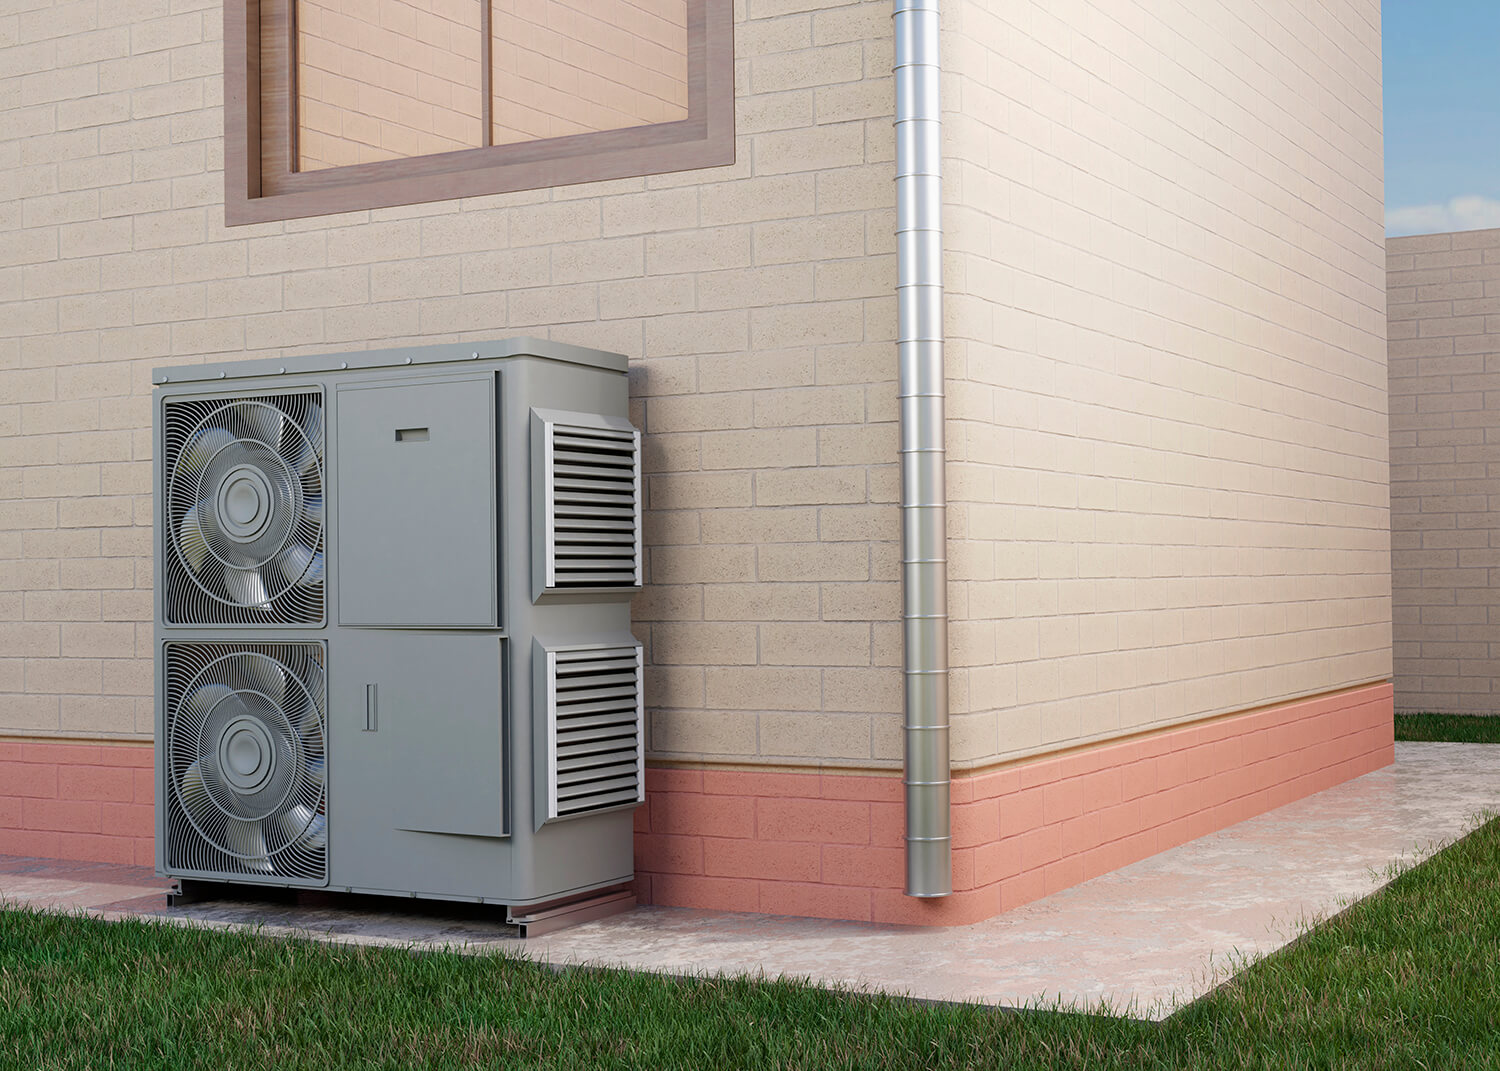 Searching for a small Heating & Air Conditioning unit